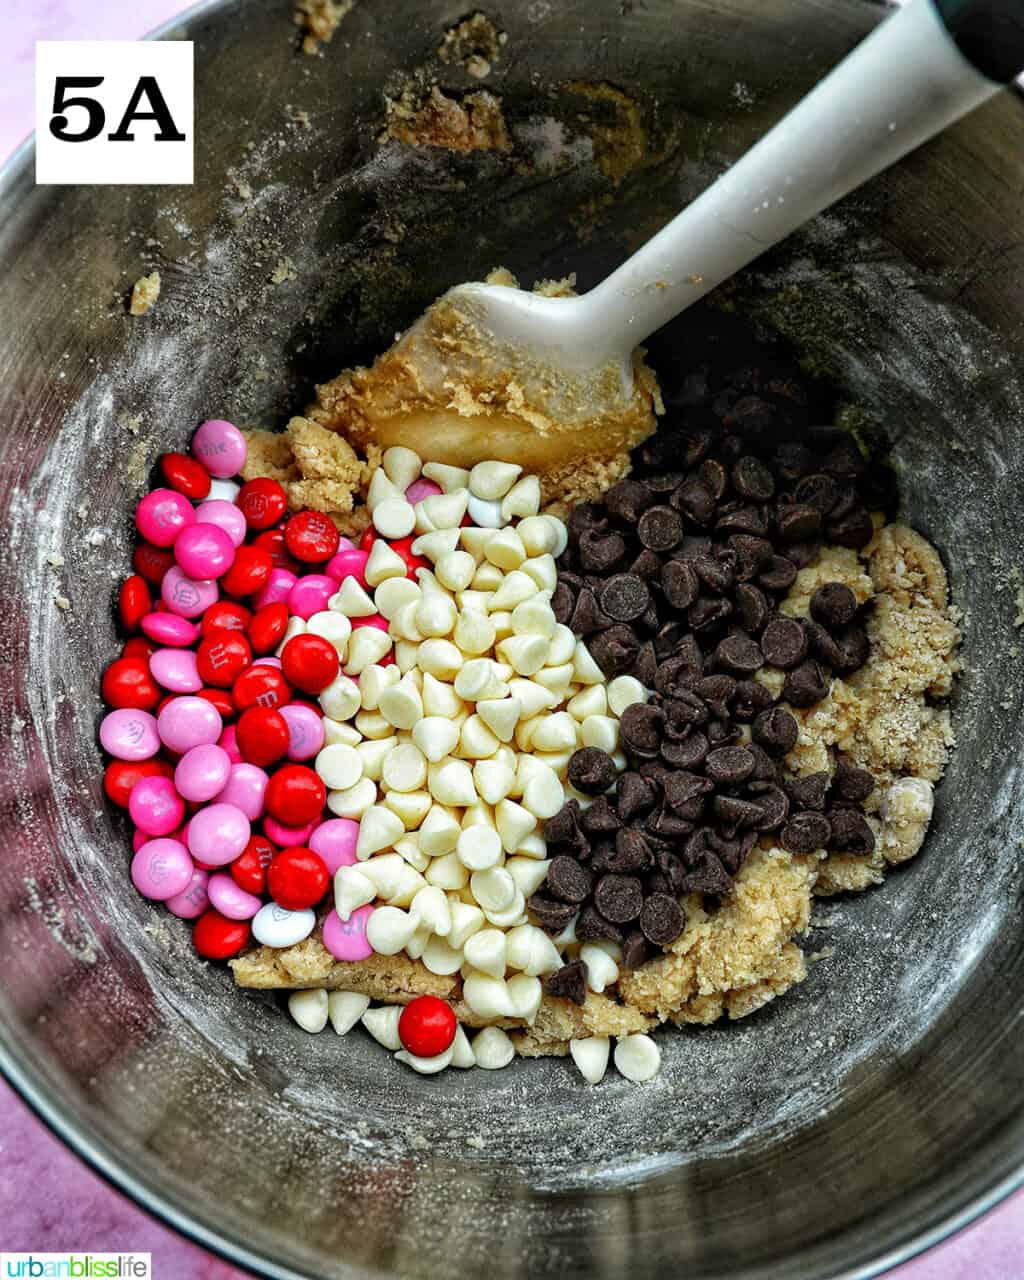 M & Ms, white chocolate chips, and semi-sweet chocolate chips added to batter in a stand mixer bowl.